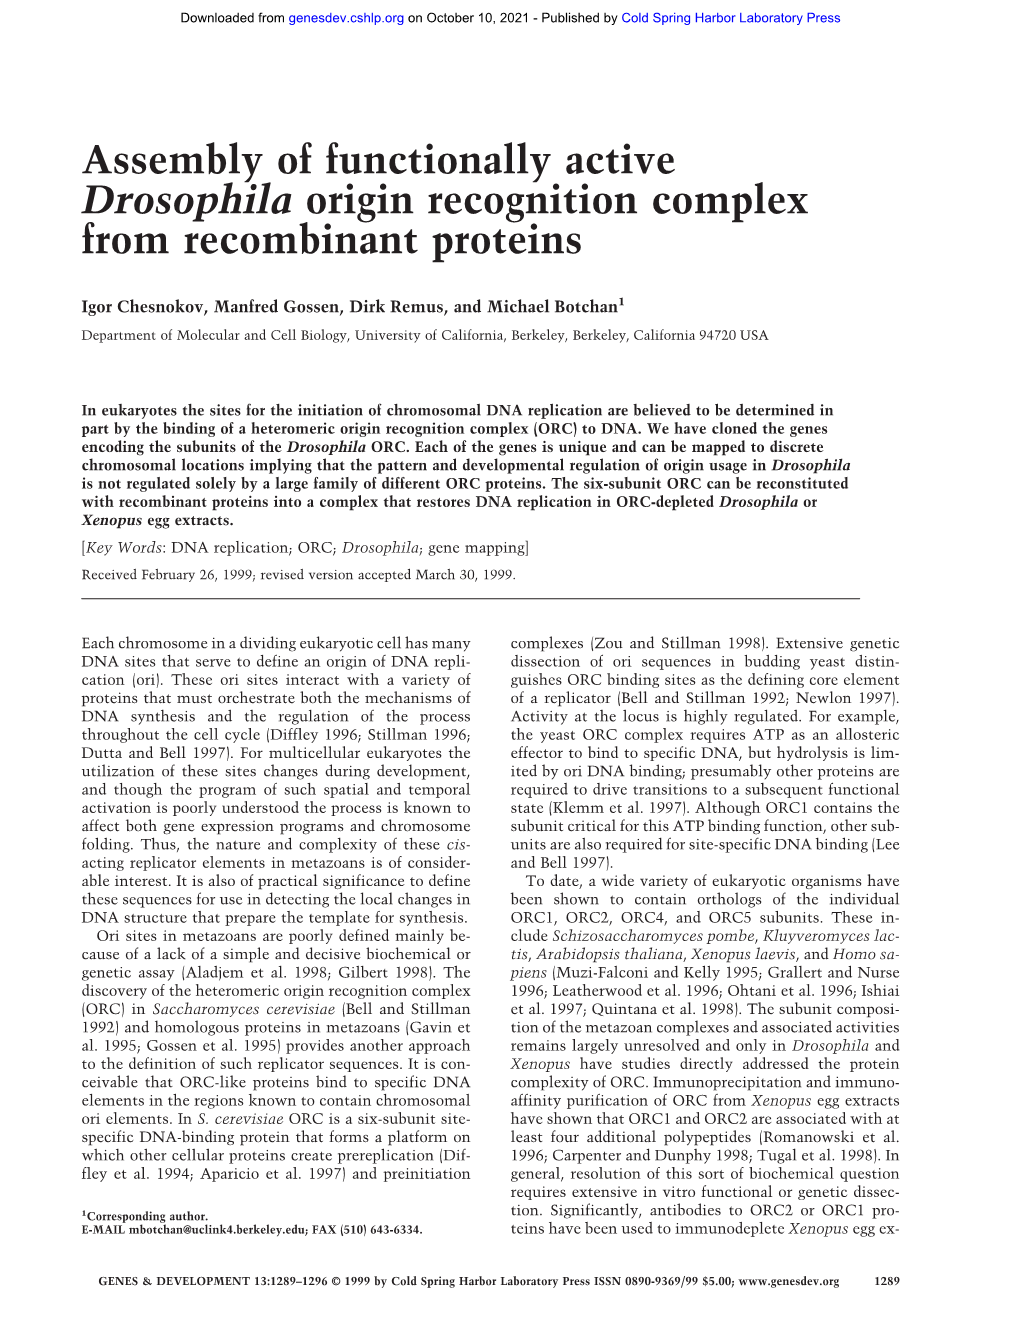 Assembly of Functionally Active Drosophila Origin Recognition Complex from Recombinant Proteins